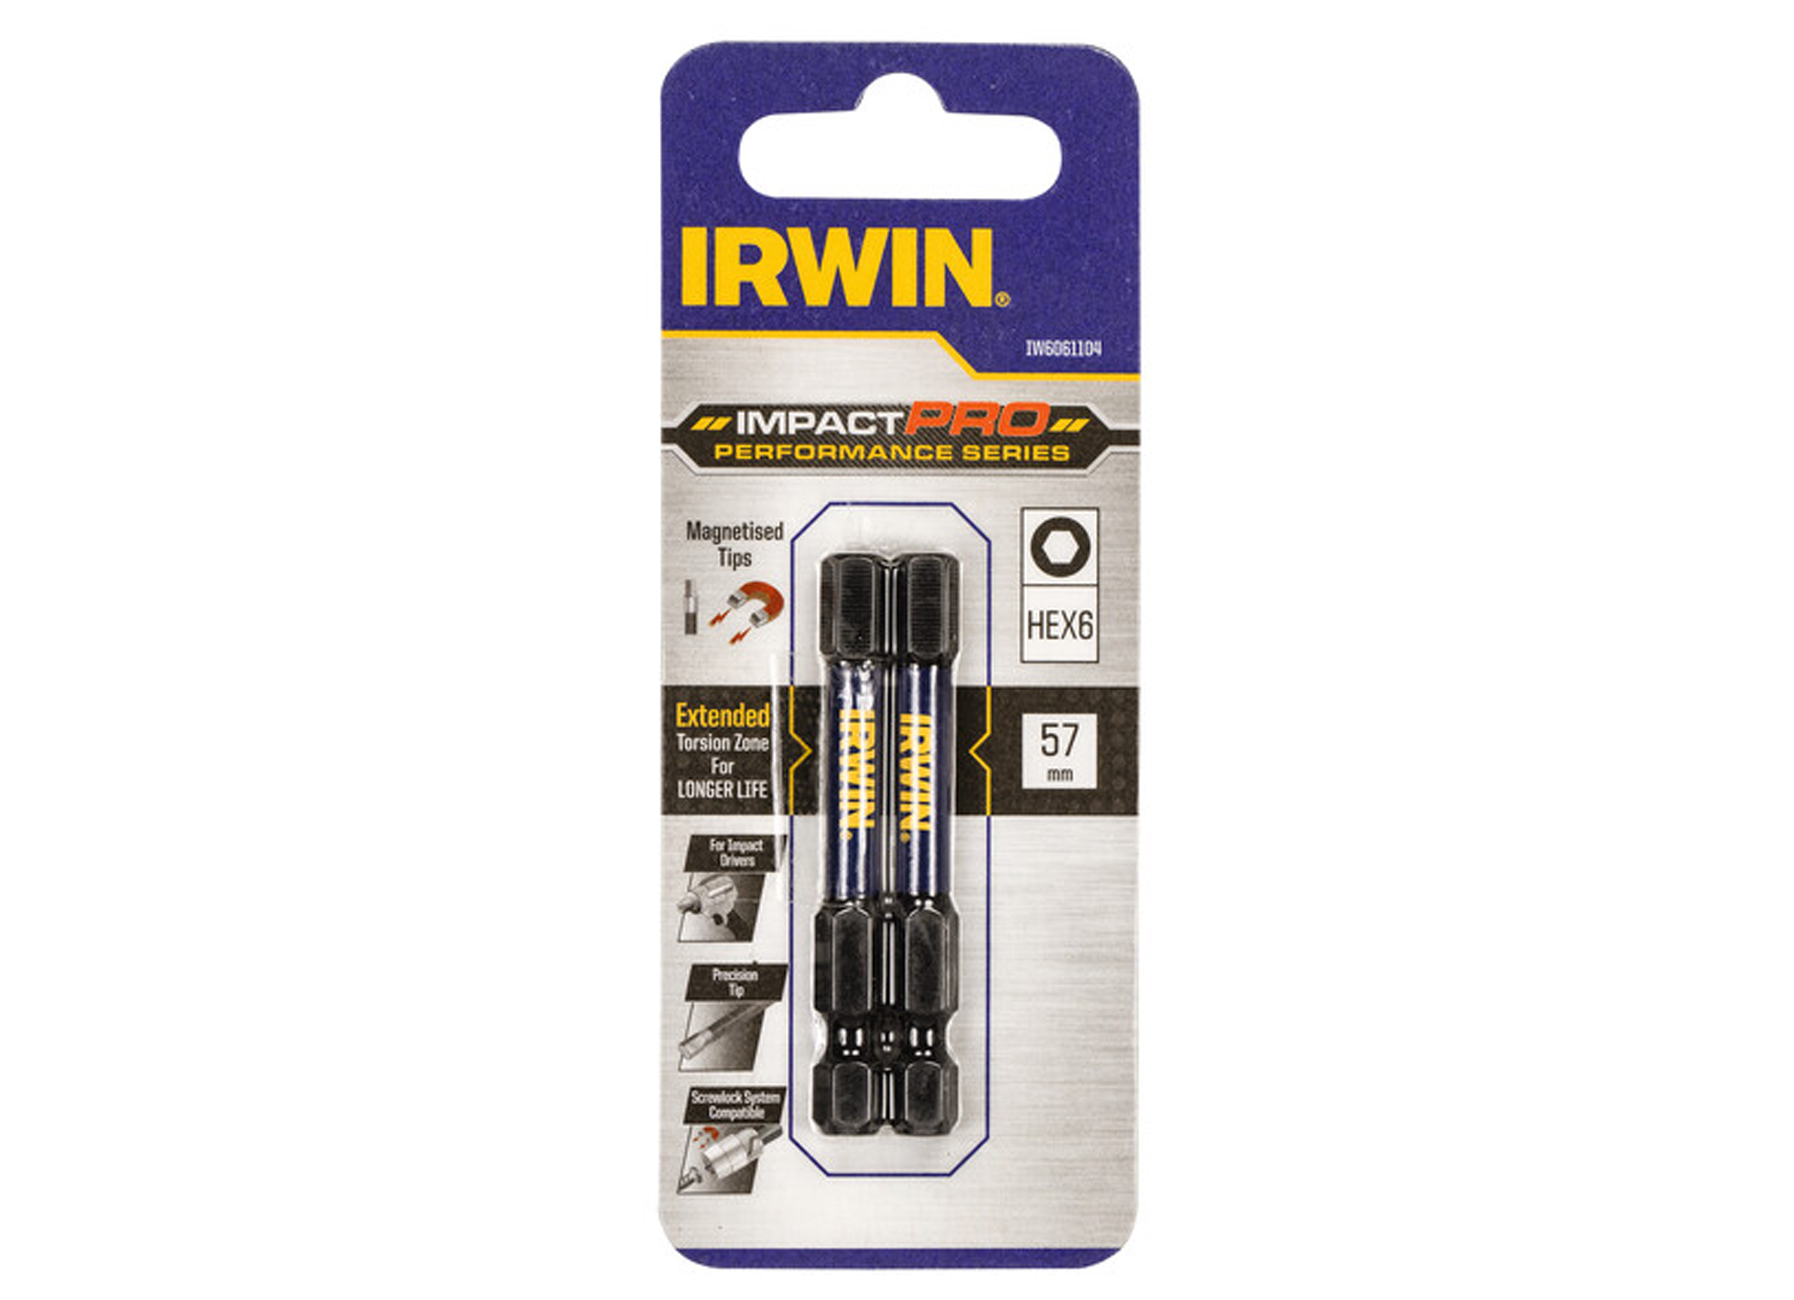 IRWIN IMPACT PRO HEX 57MM EMBOUT POWER